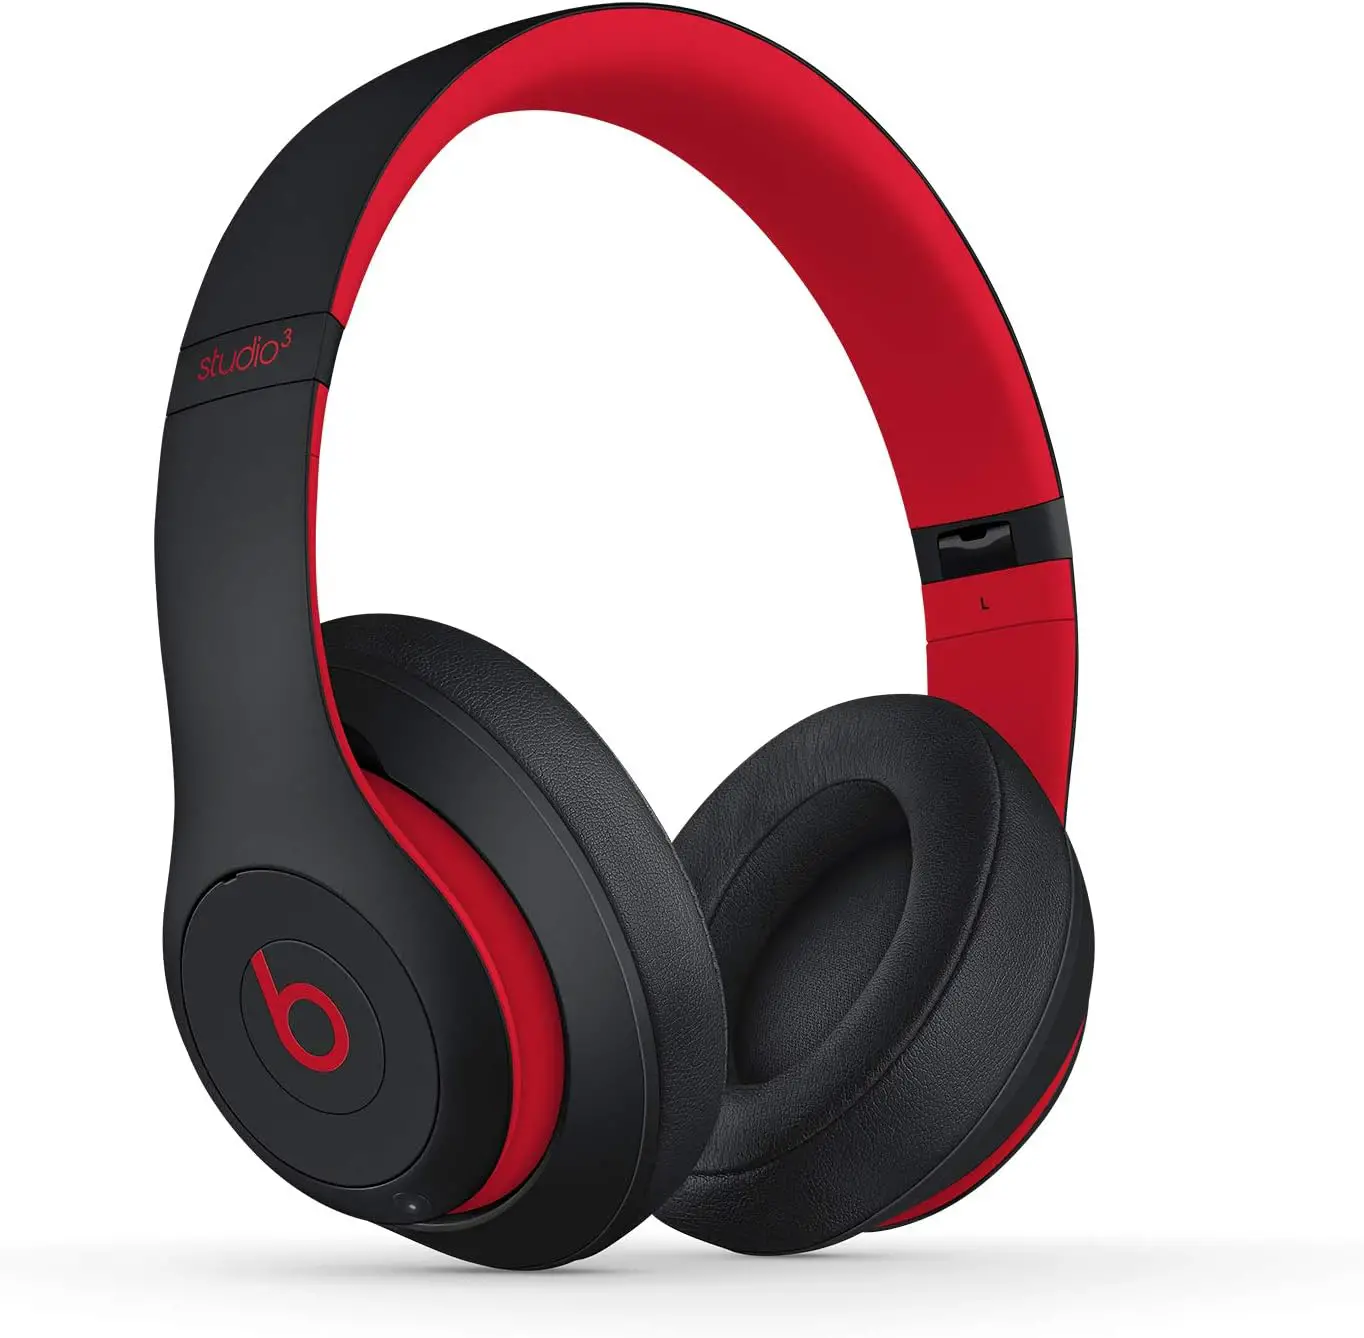 Beats Studio3 Wireless Noise Cancelling Over Ear Headphones Apple W1 Headphone Chip Class 1 Bluetooth 22 Hours of Listening Time Built in Microphone Red